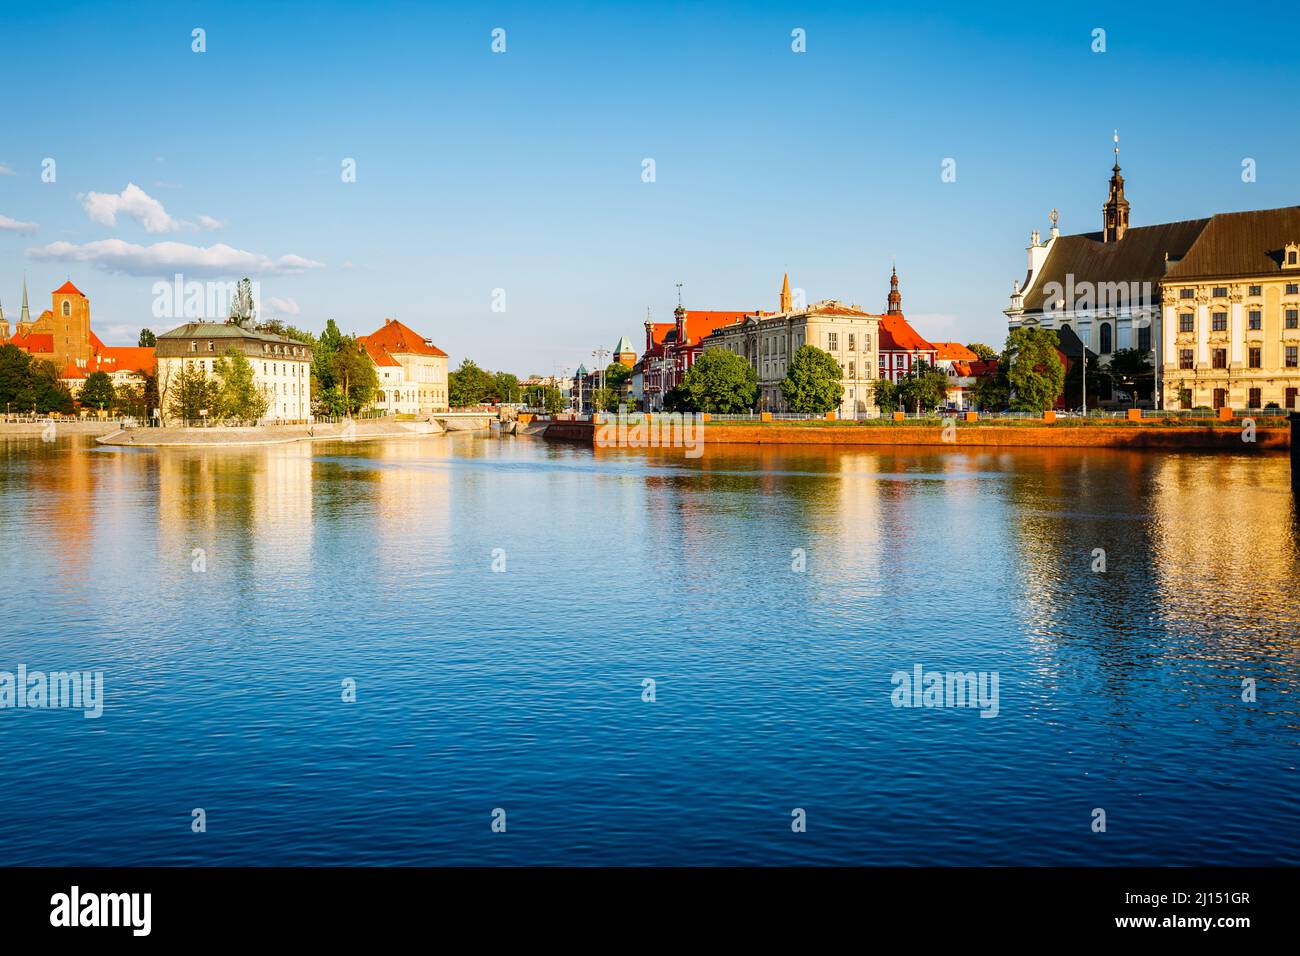 Fantastic view of the ancient city Wroclaw. Picturesque scene. Location: famous place Odra river, Poland, Europe. Historical capital of Silesia. Beaut Stock Photo